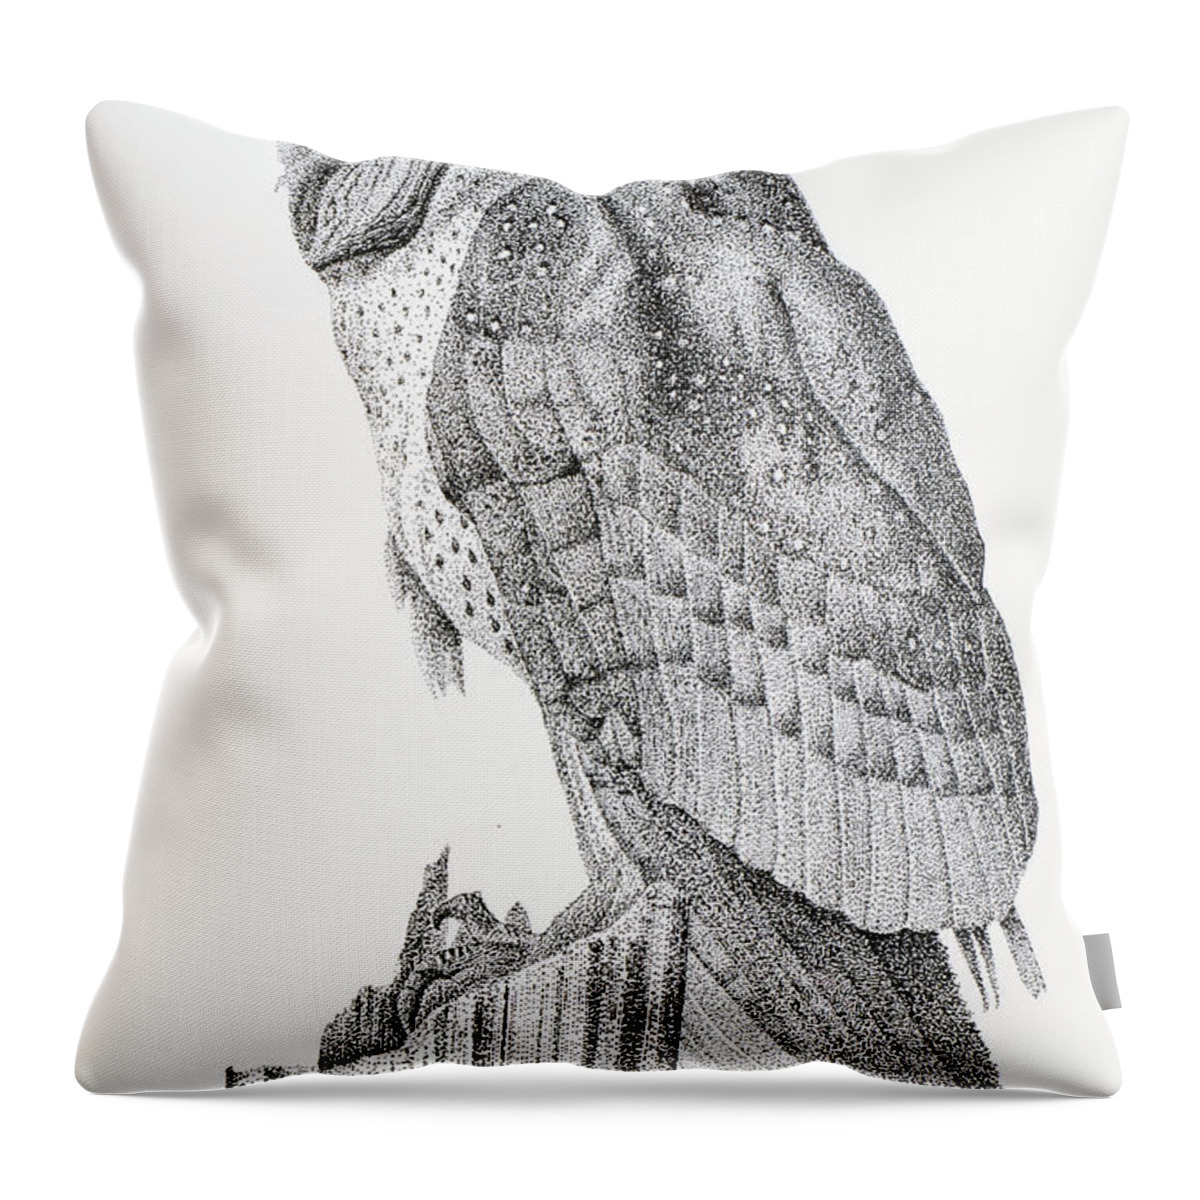 Owl Throw Pillow featuring the drawing Owl by Sam Davis Johnson